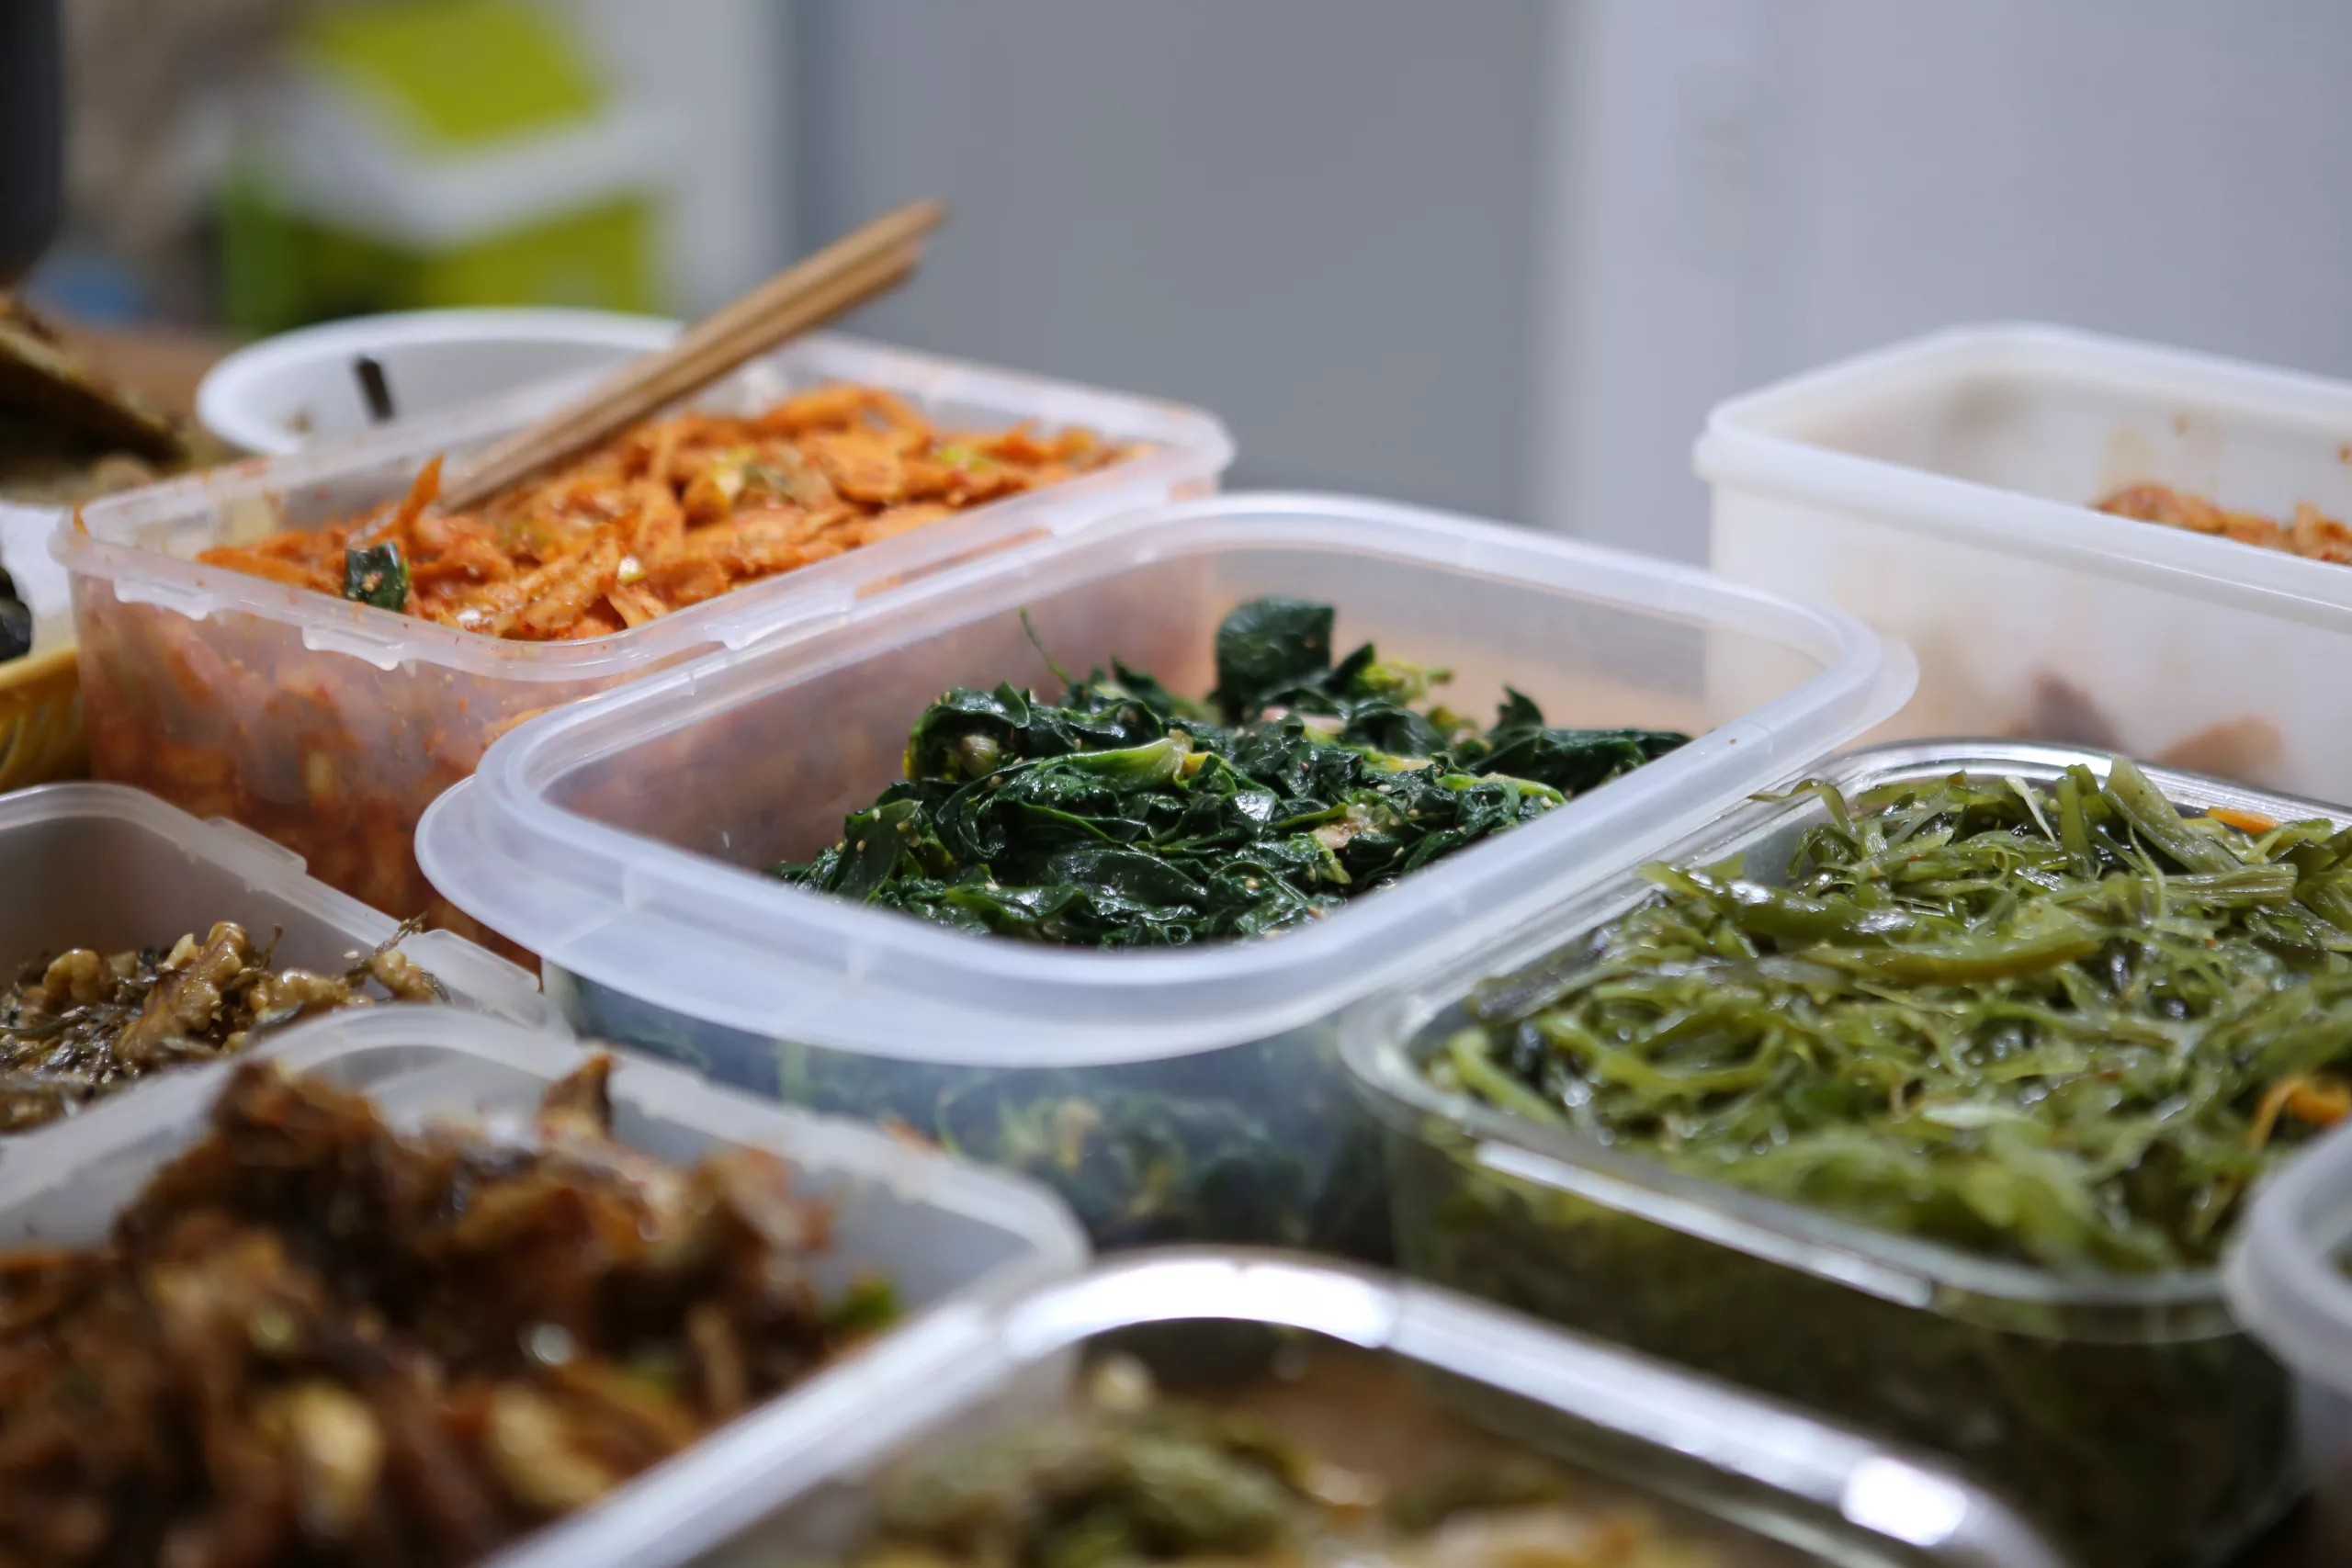 Mastering Meal Prep: 3 Tips for Eating Balanced Meals